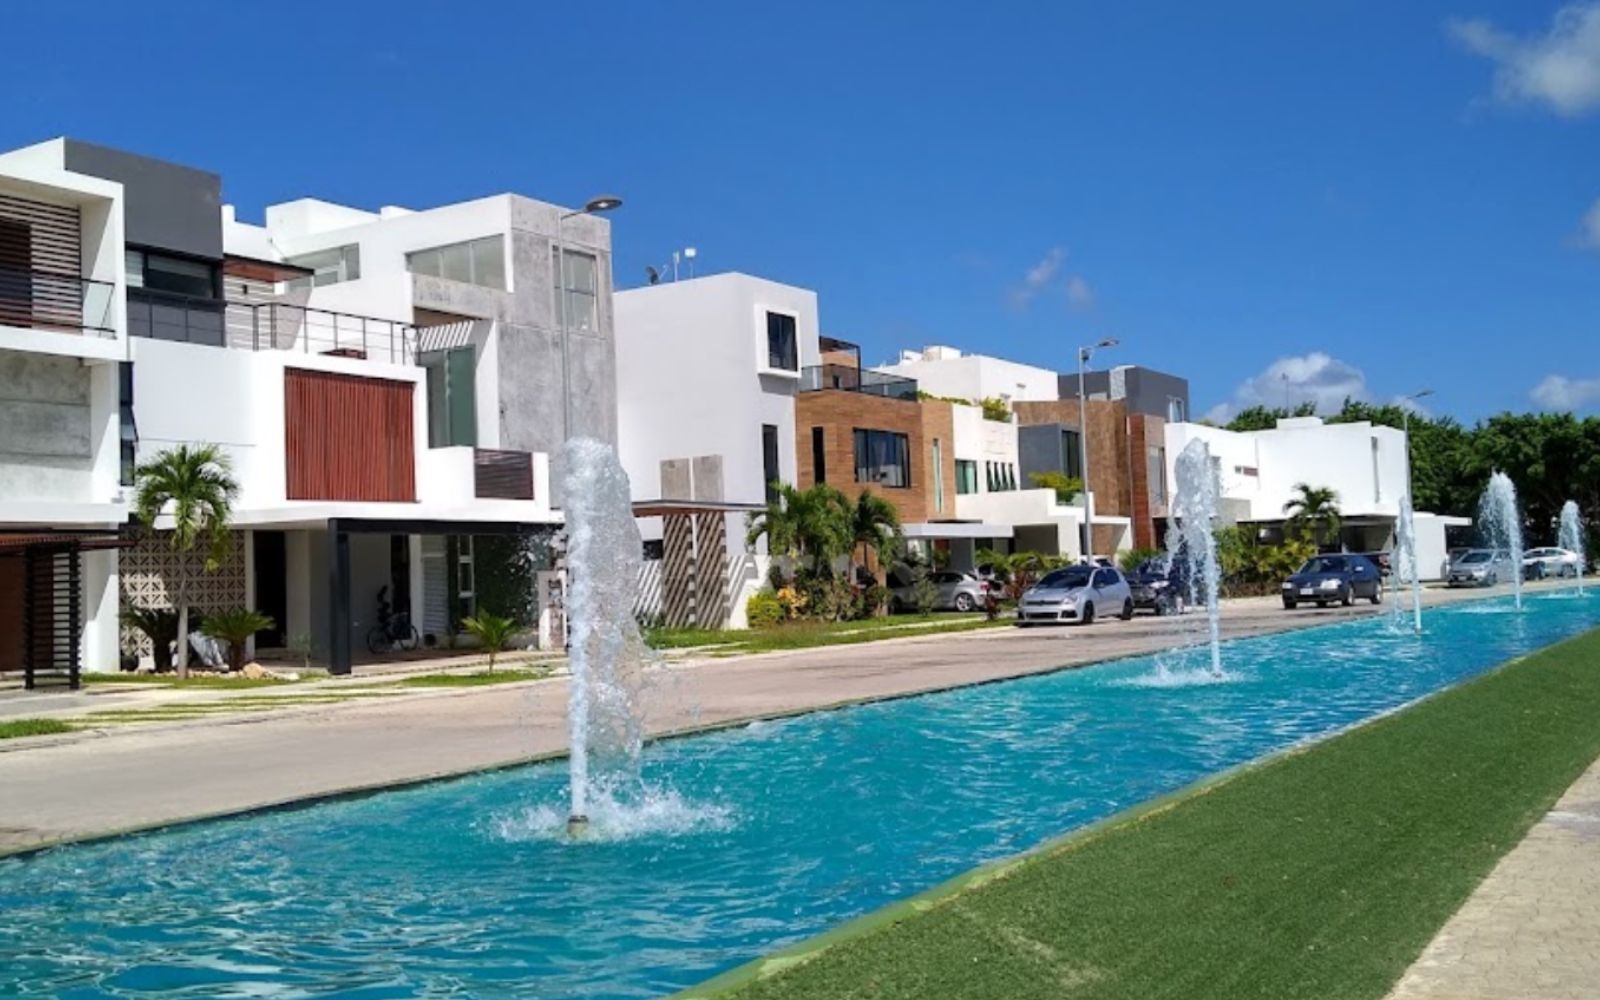 House with private pool, high ceilings for sale in Aqua gated community, Cancun.